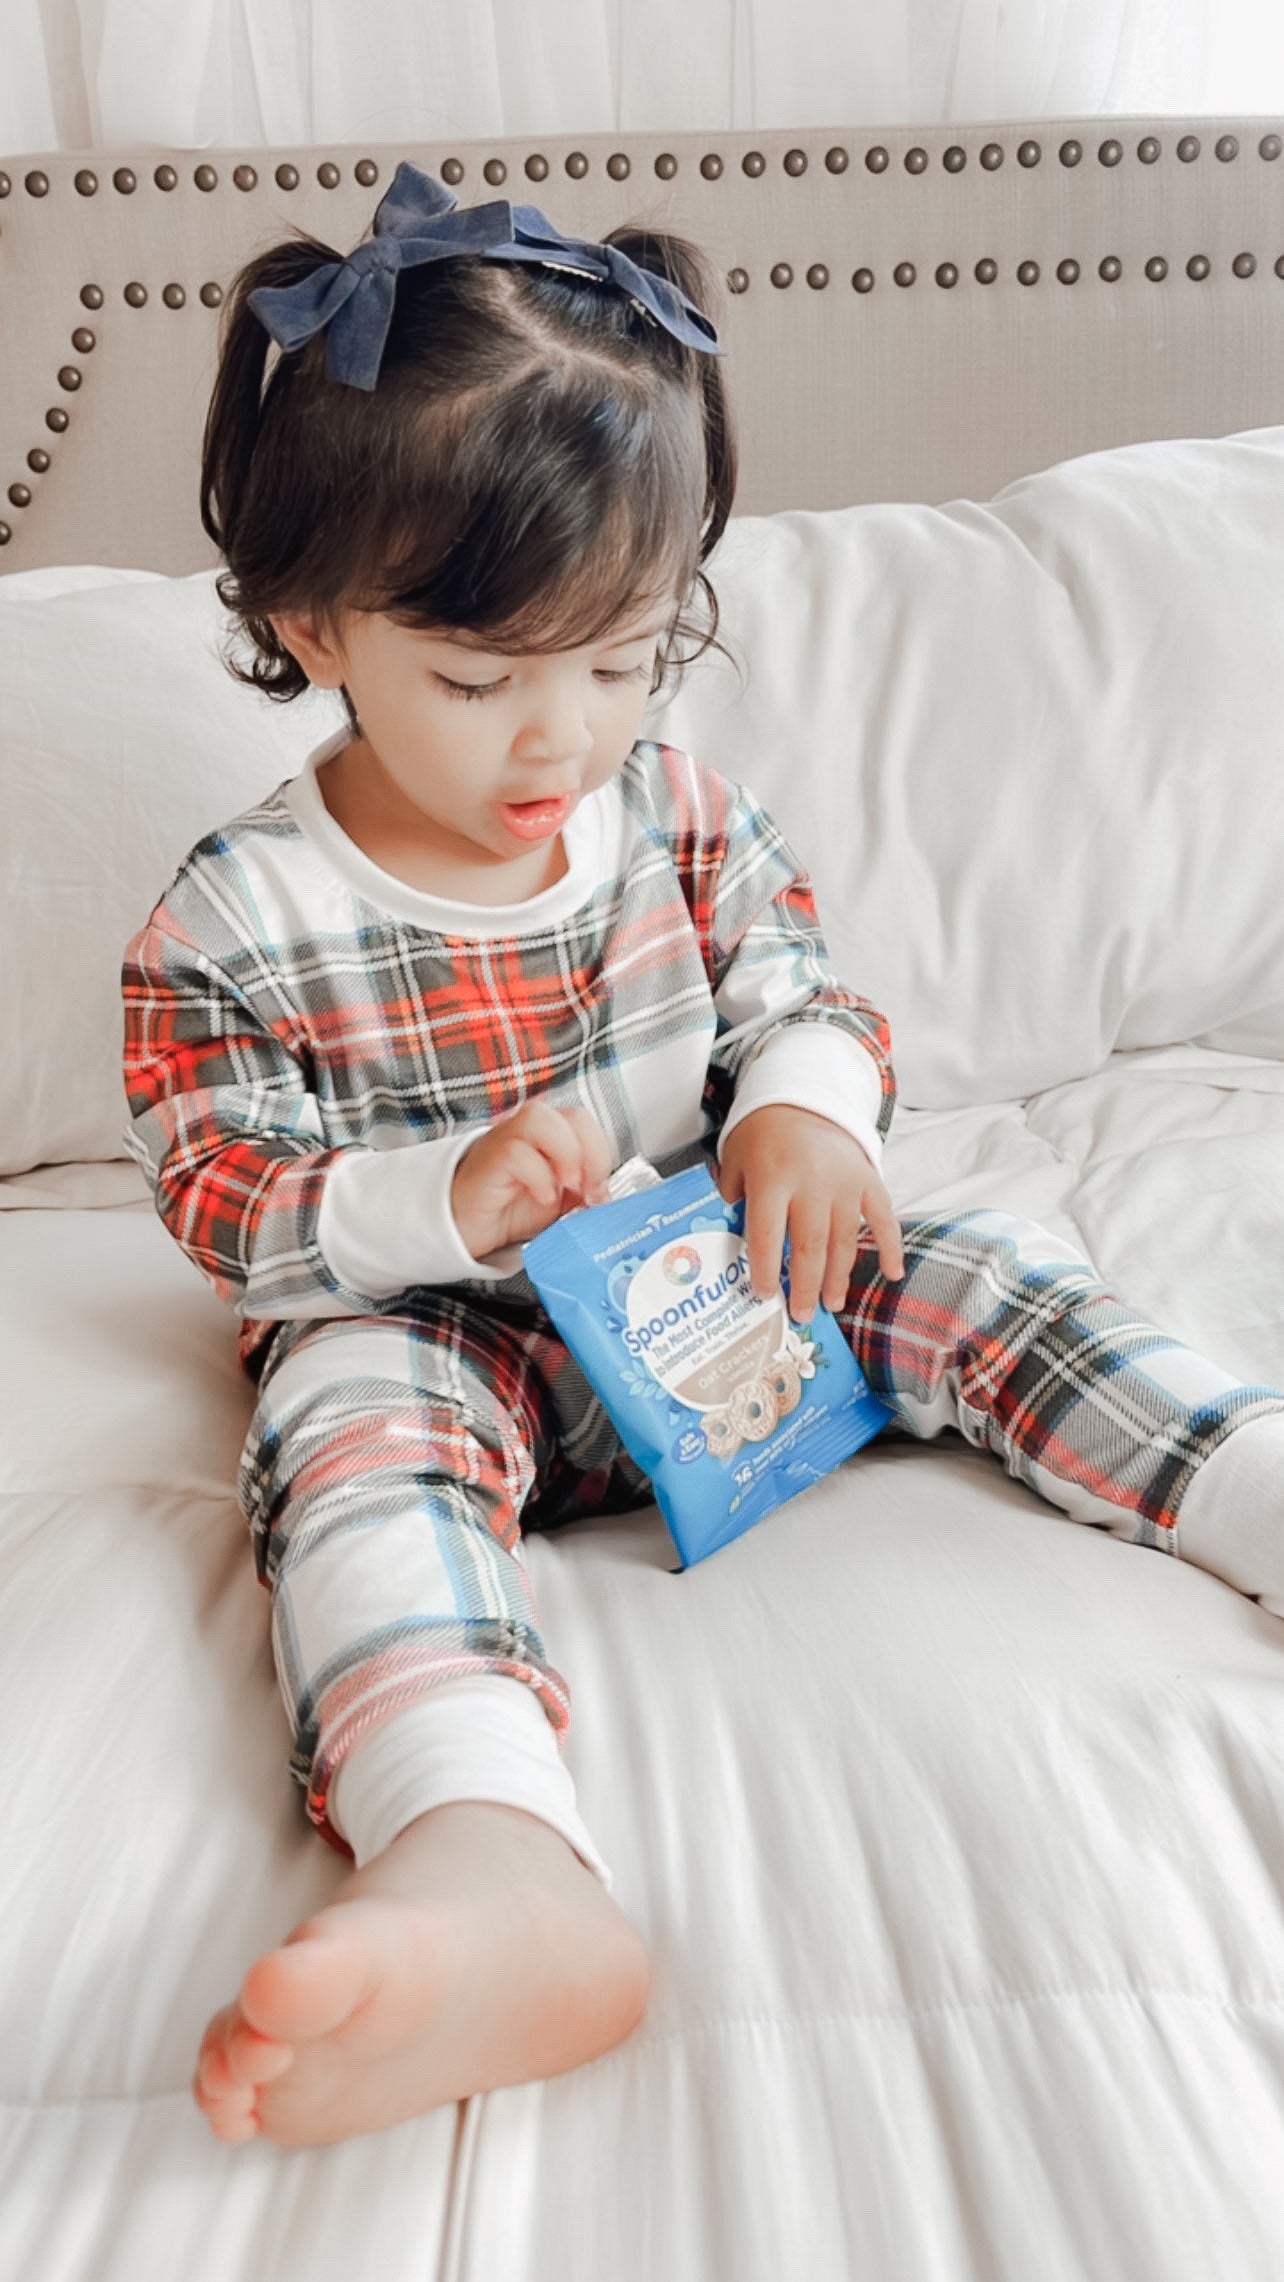 Young child wearing the 2 Pc Christmas Pajamas - Stuart Tartan Holiday Plaid, while snacking on cheerio style snacks.